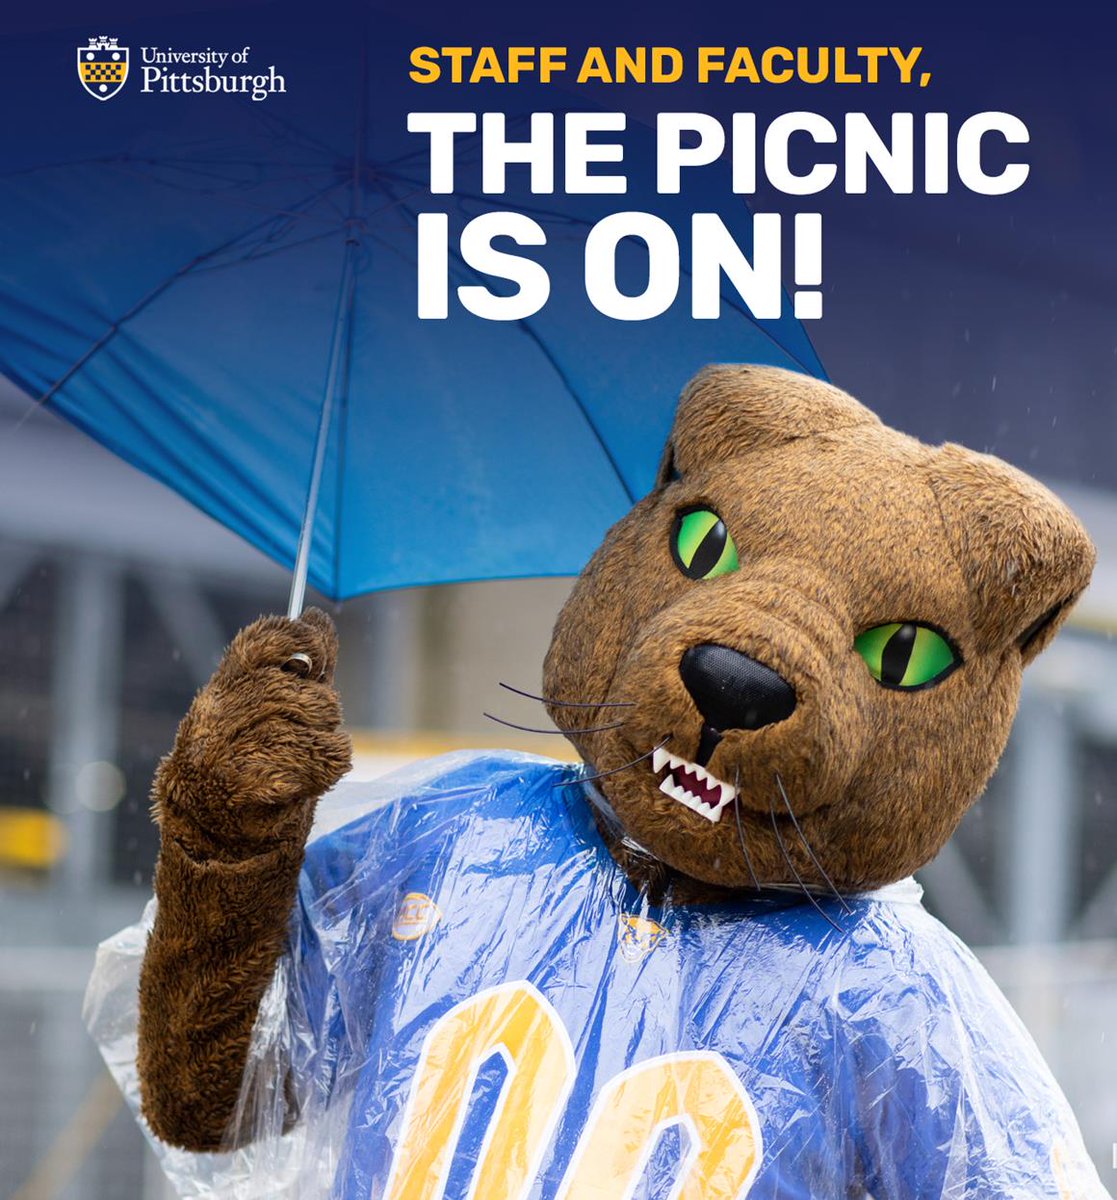 Rain or shine🤞☀️ the Chancellor’s Staff and Faculty Appreciation Picnic is on for tomorrow (5/15) from 11:30am-2pm. Come celebrate our world-class staff and faculty food, music and more. pitt.ly/4al2gJr